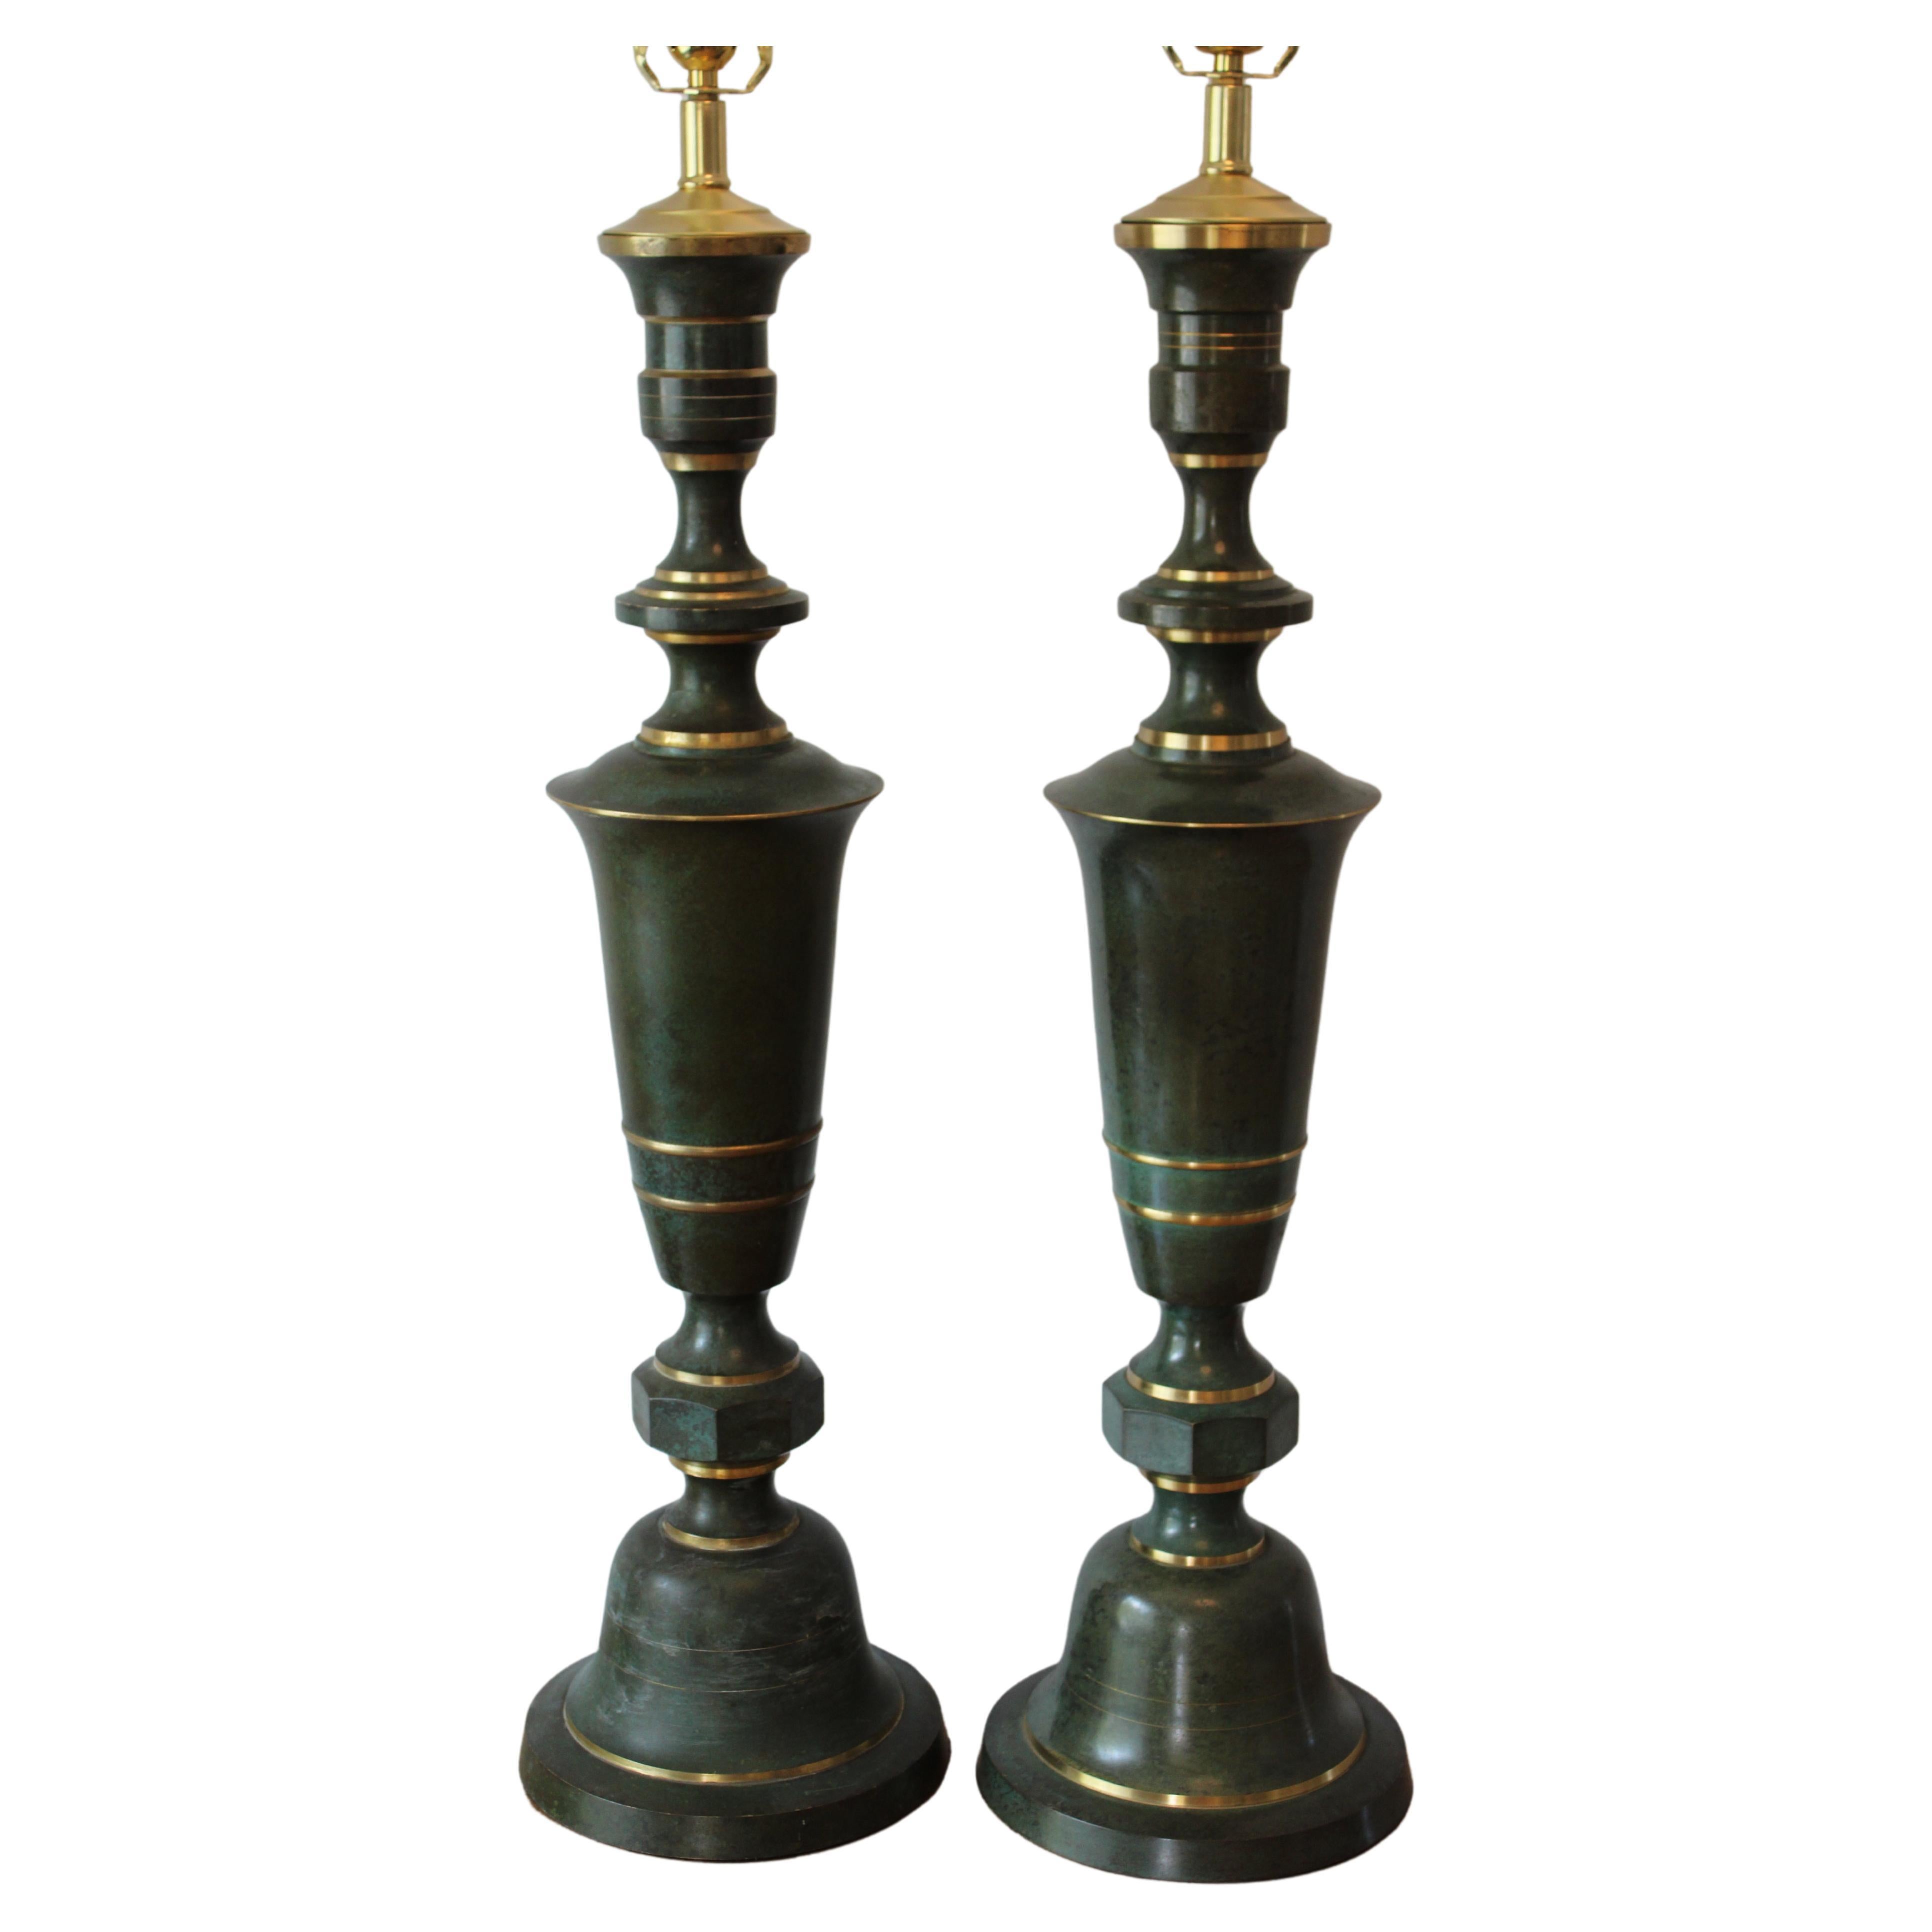 Pair of Lamps Attributed to Carl Sorensen